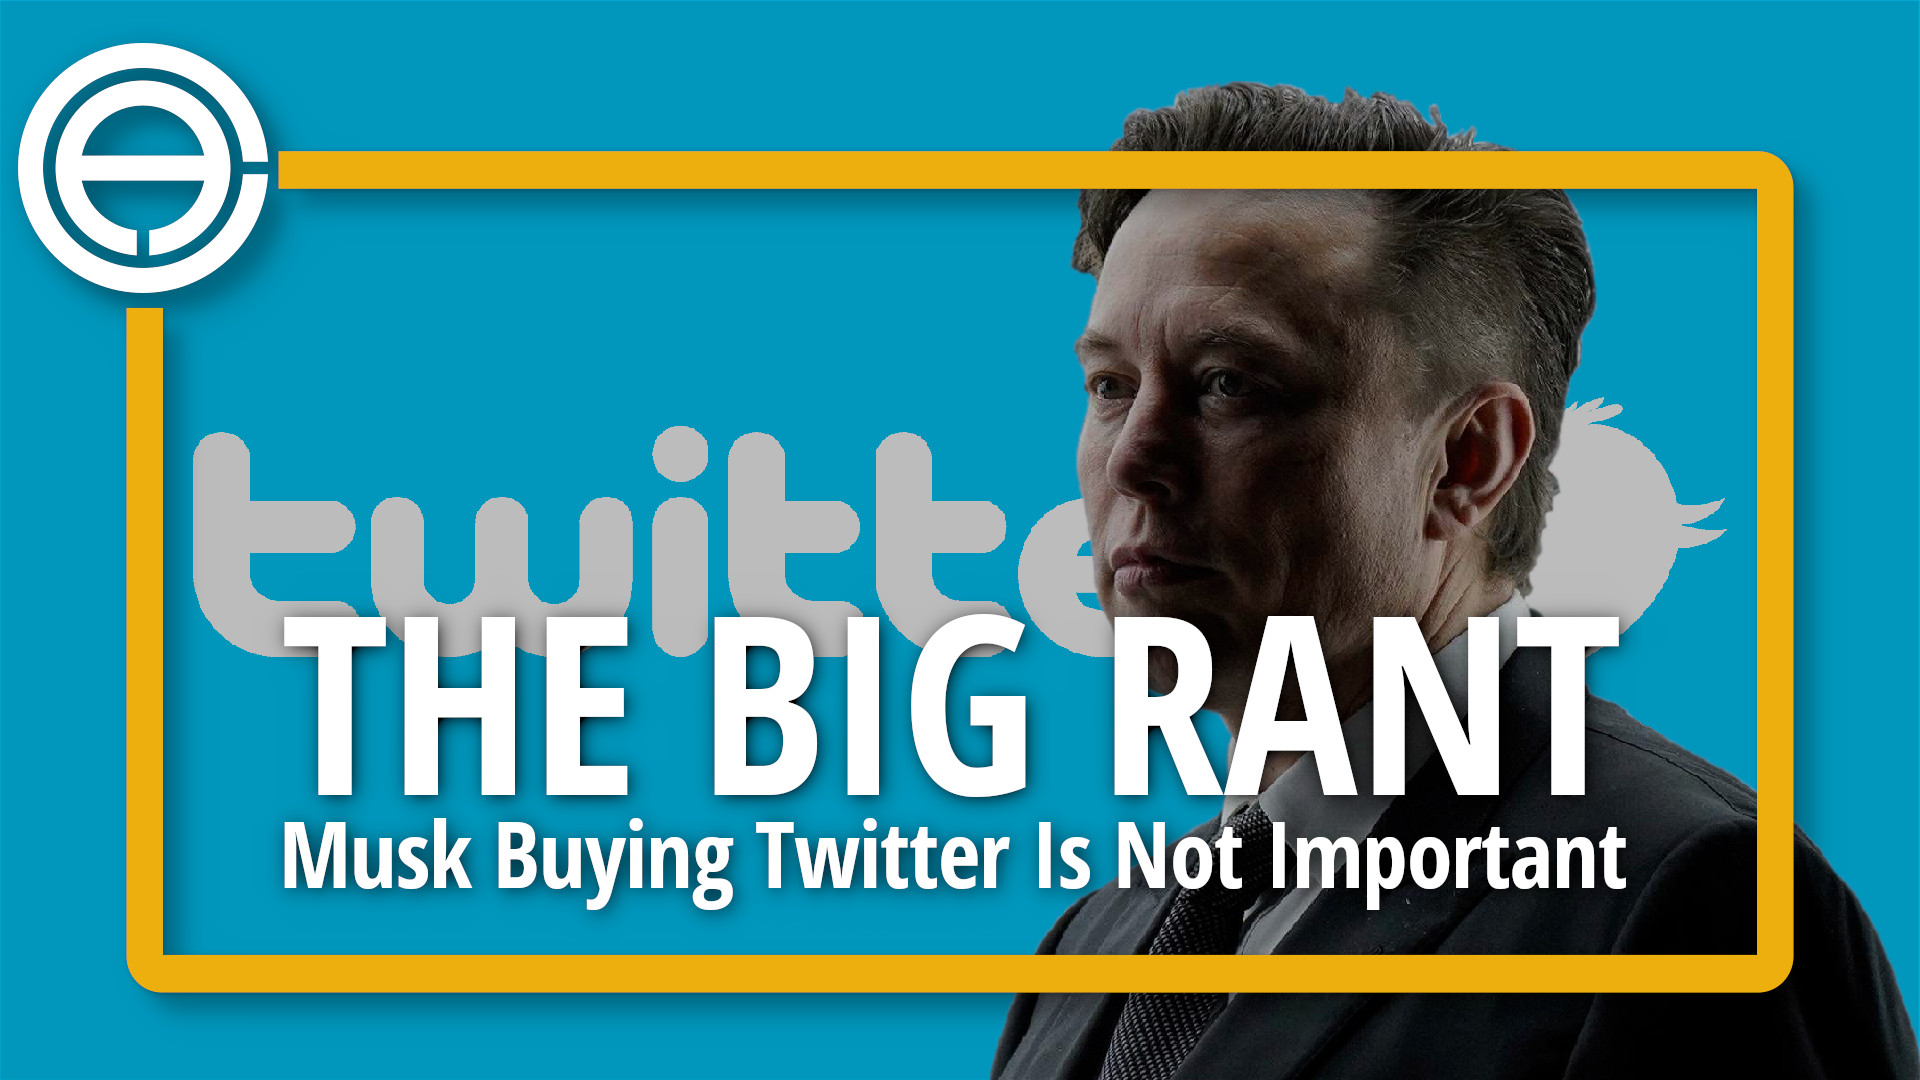 THE BIG RANT | Elon Musk Buying Twitter Is Not Important